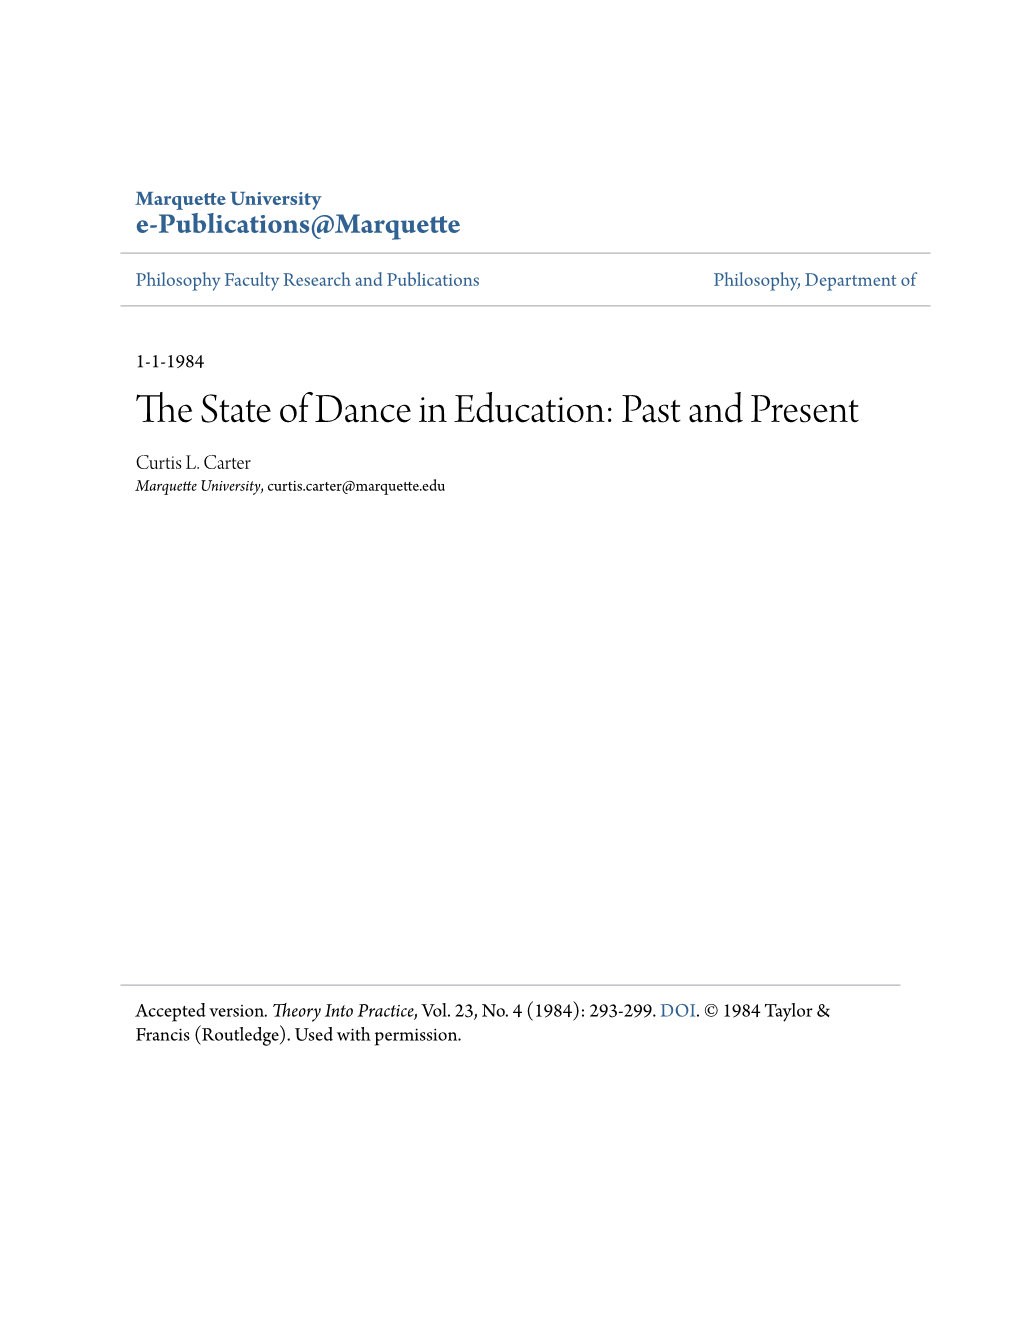 The State of Dance in Education: Past and Present